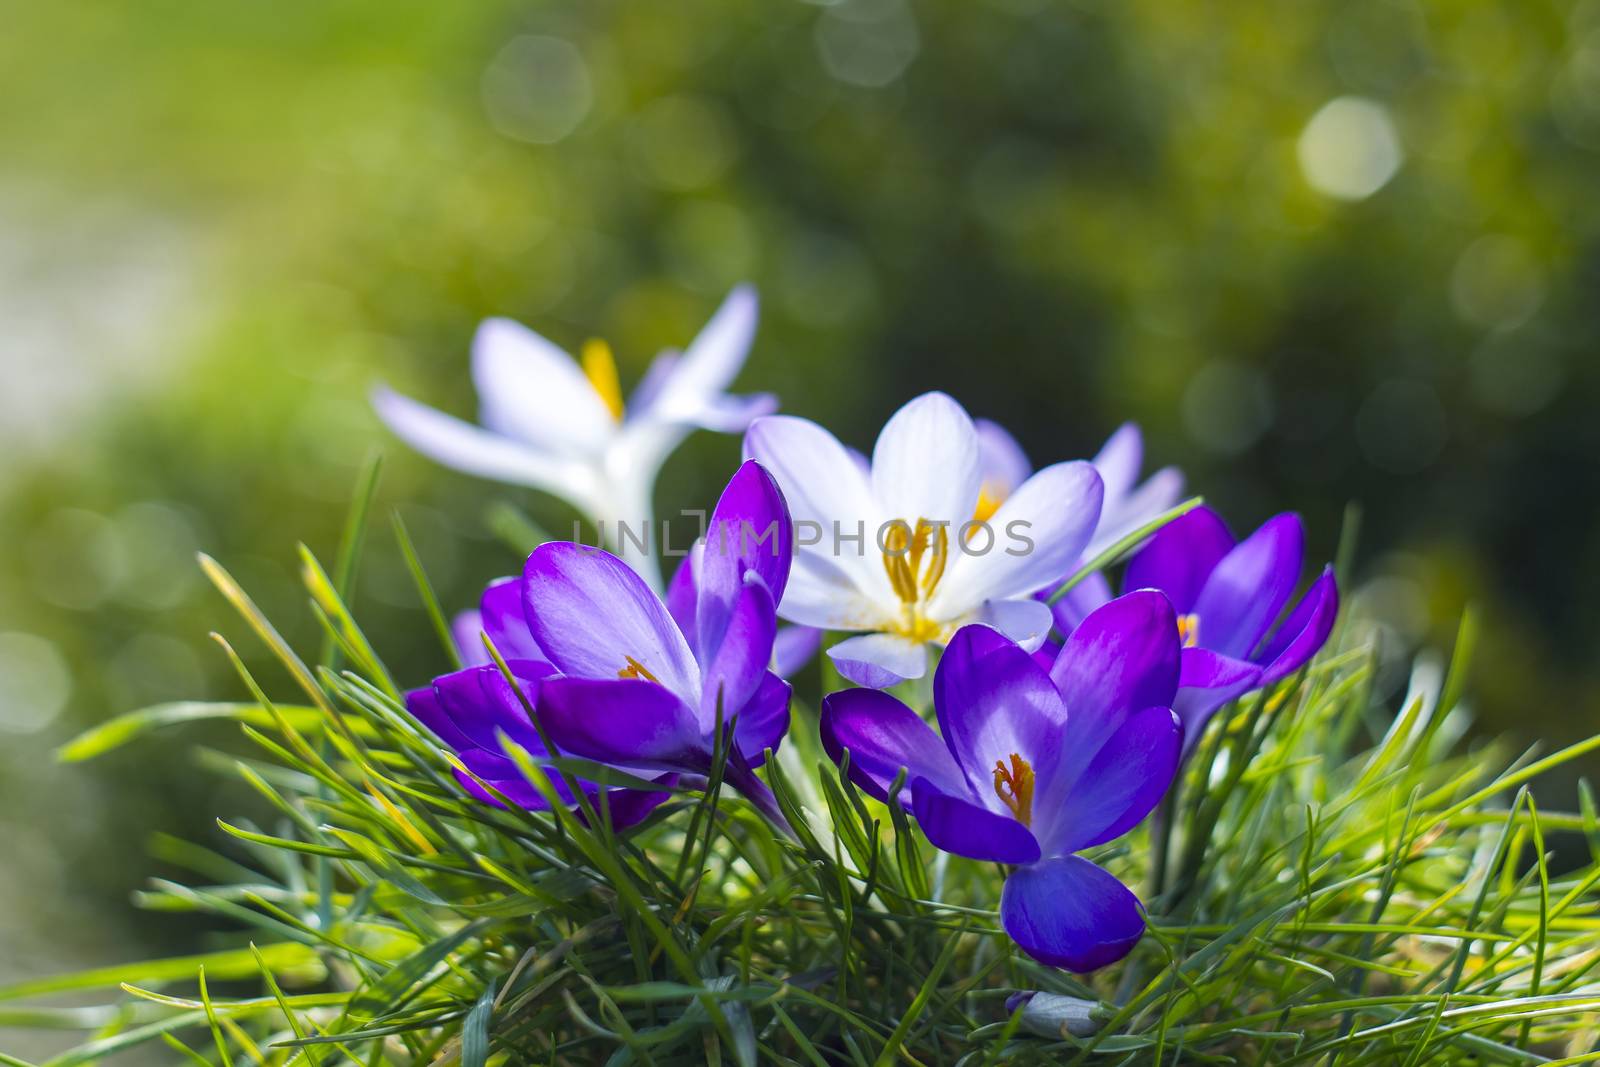 crocus - one of the first spring flowers